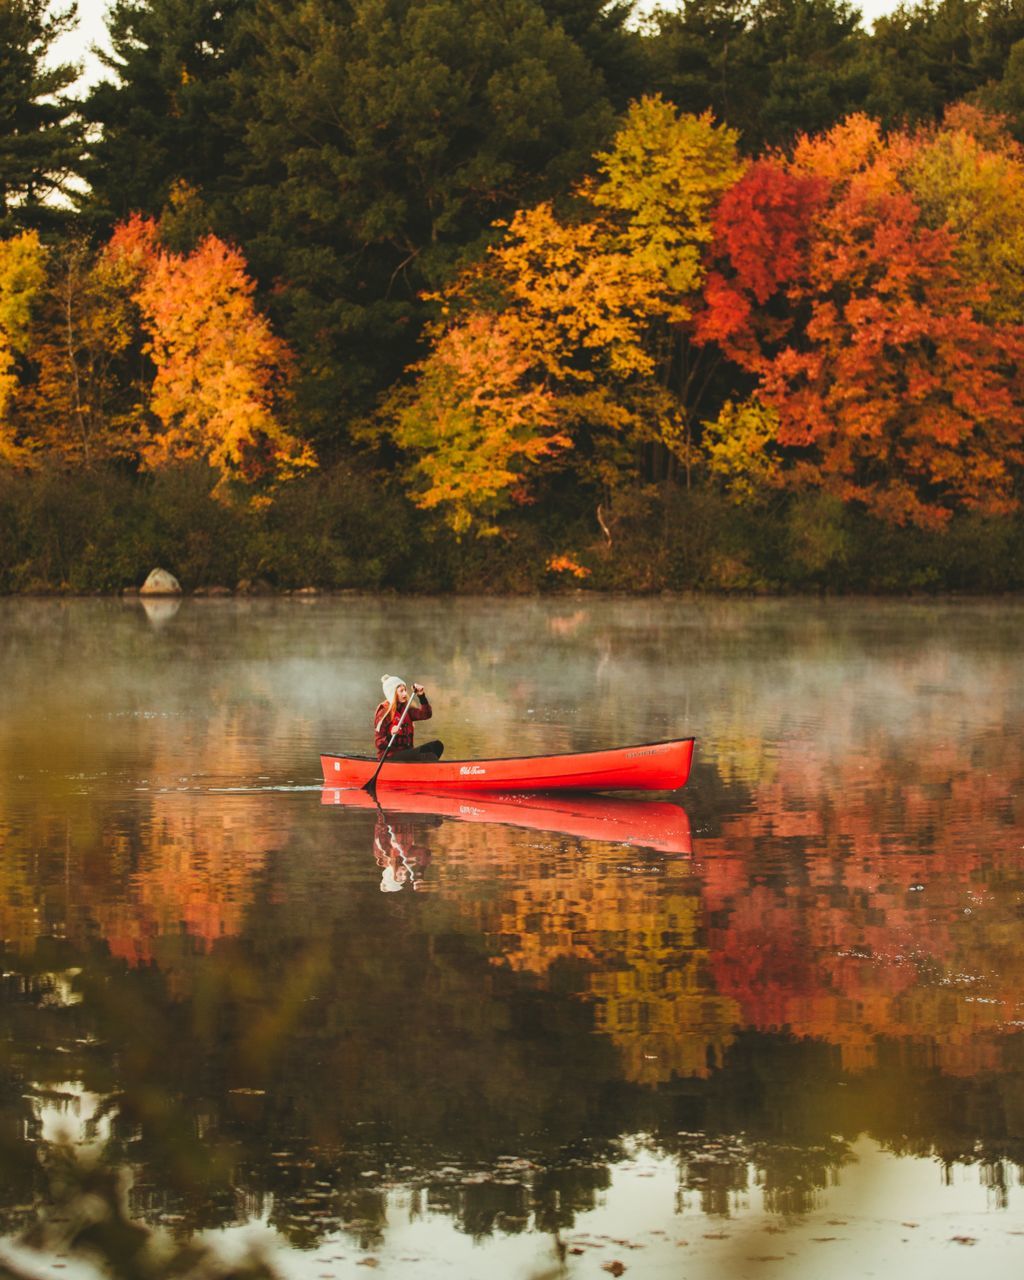 water, tree, lake, autumn, change, plant, nature, reflection, orange color, real people, waterfront, beauty in nature, nautical vessel, one person, lifestyles, day, tranquility, leisure activity, transportation, outdoors